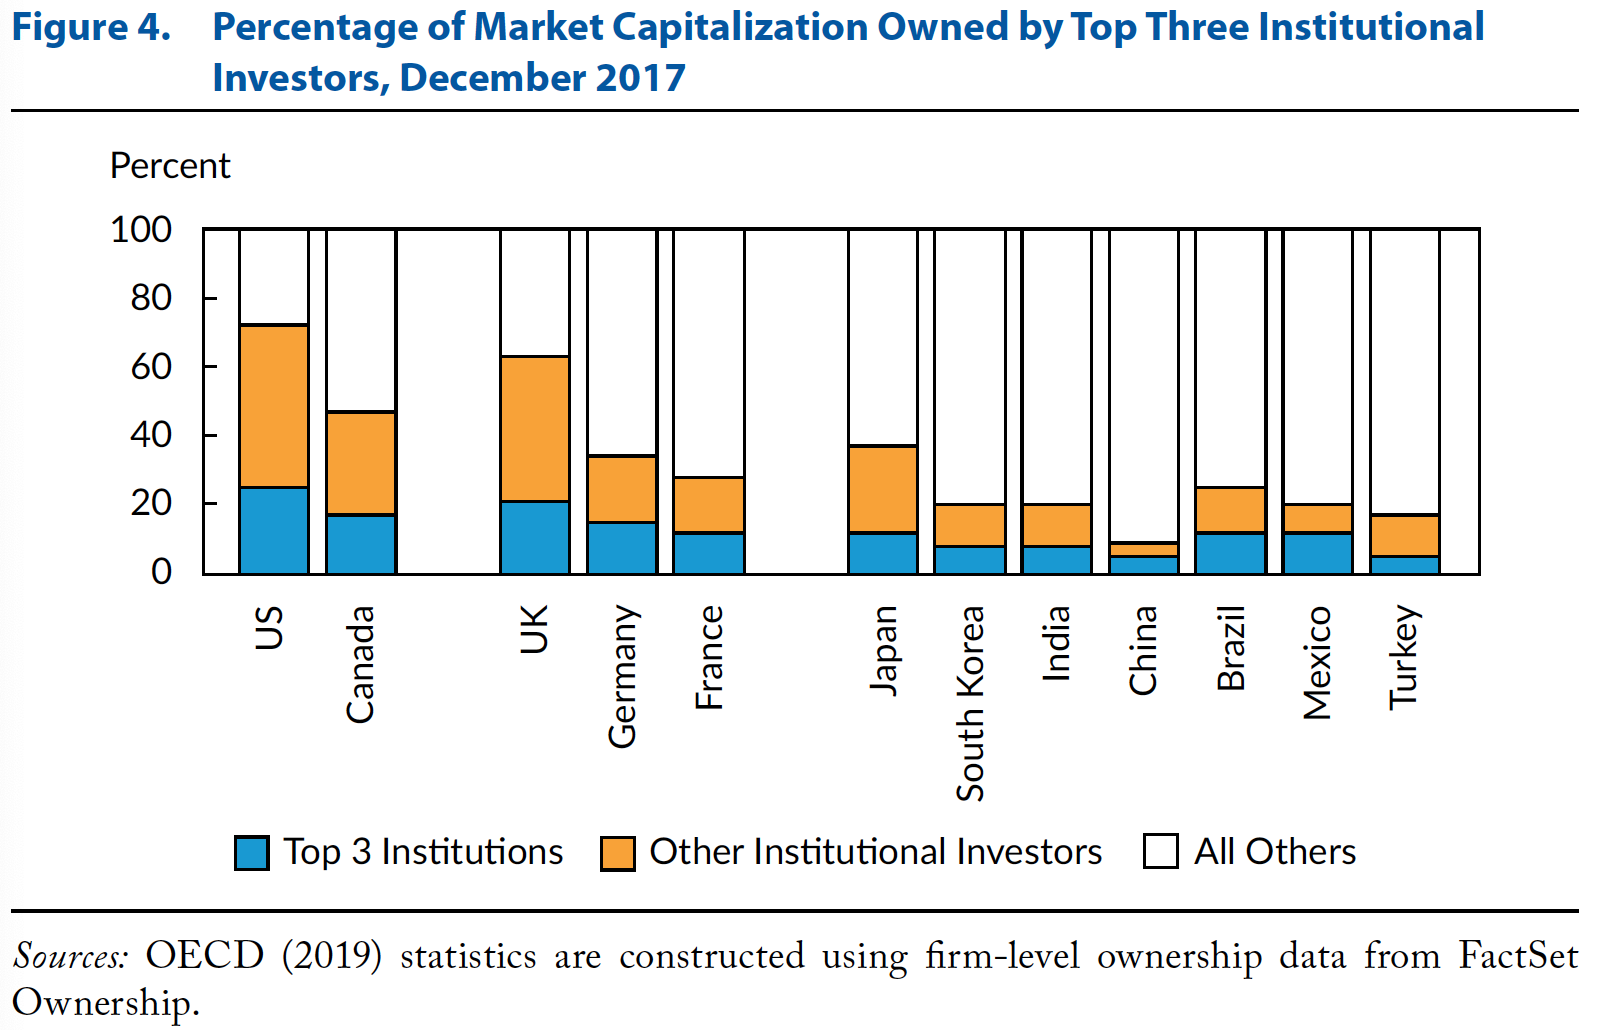 Large institutional investors own the majority of equities. This is where the power is, GME notwithstanding. Source: CFA Institute (2020)